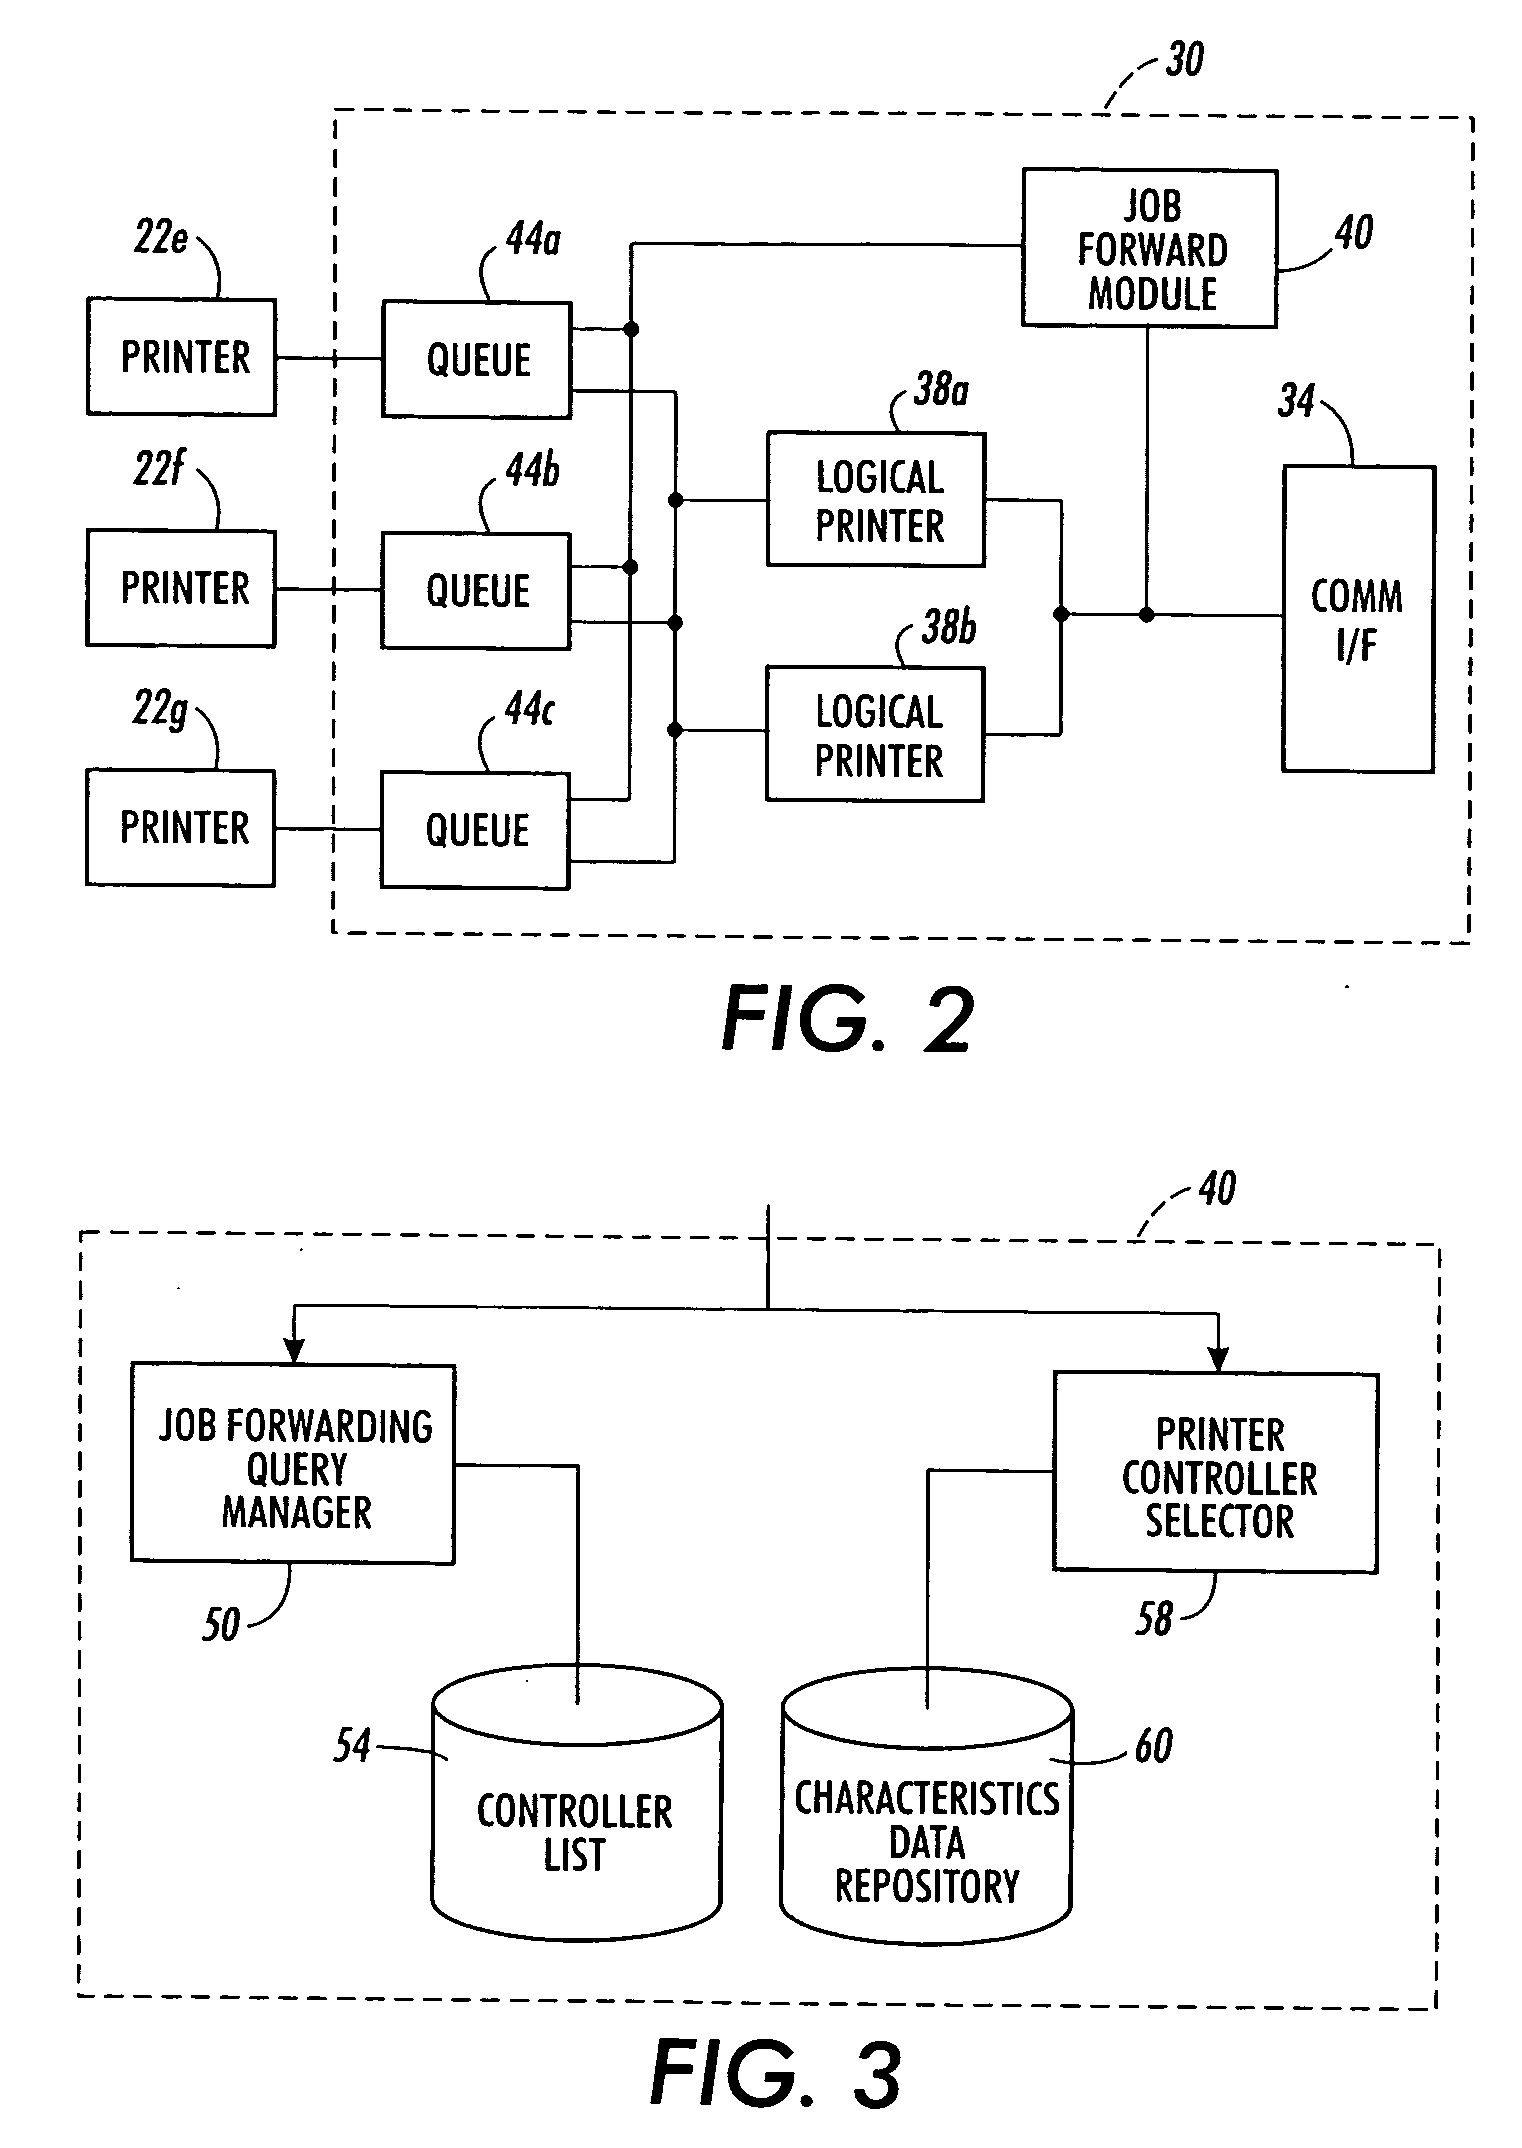 Method and system for managing the distribution of print job files among shared printers on a computer network